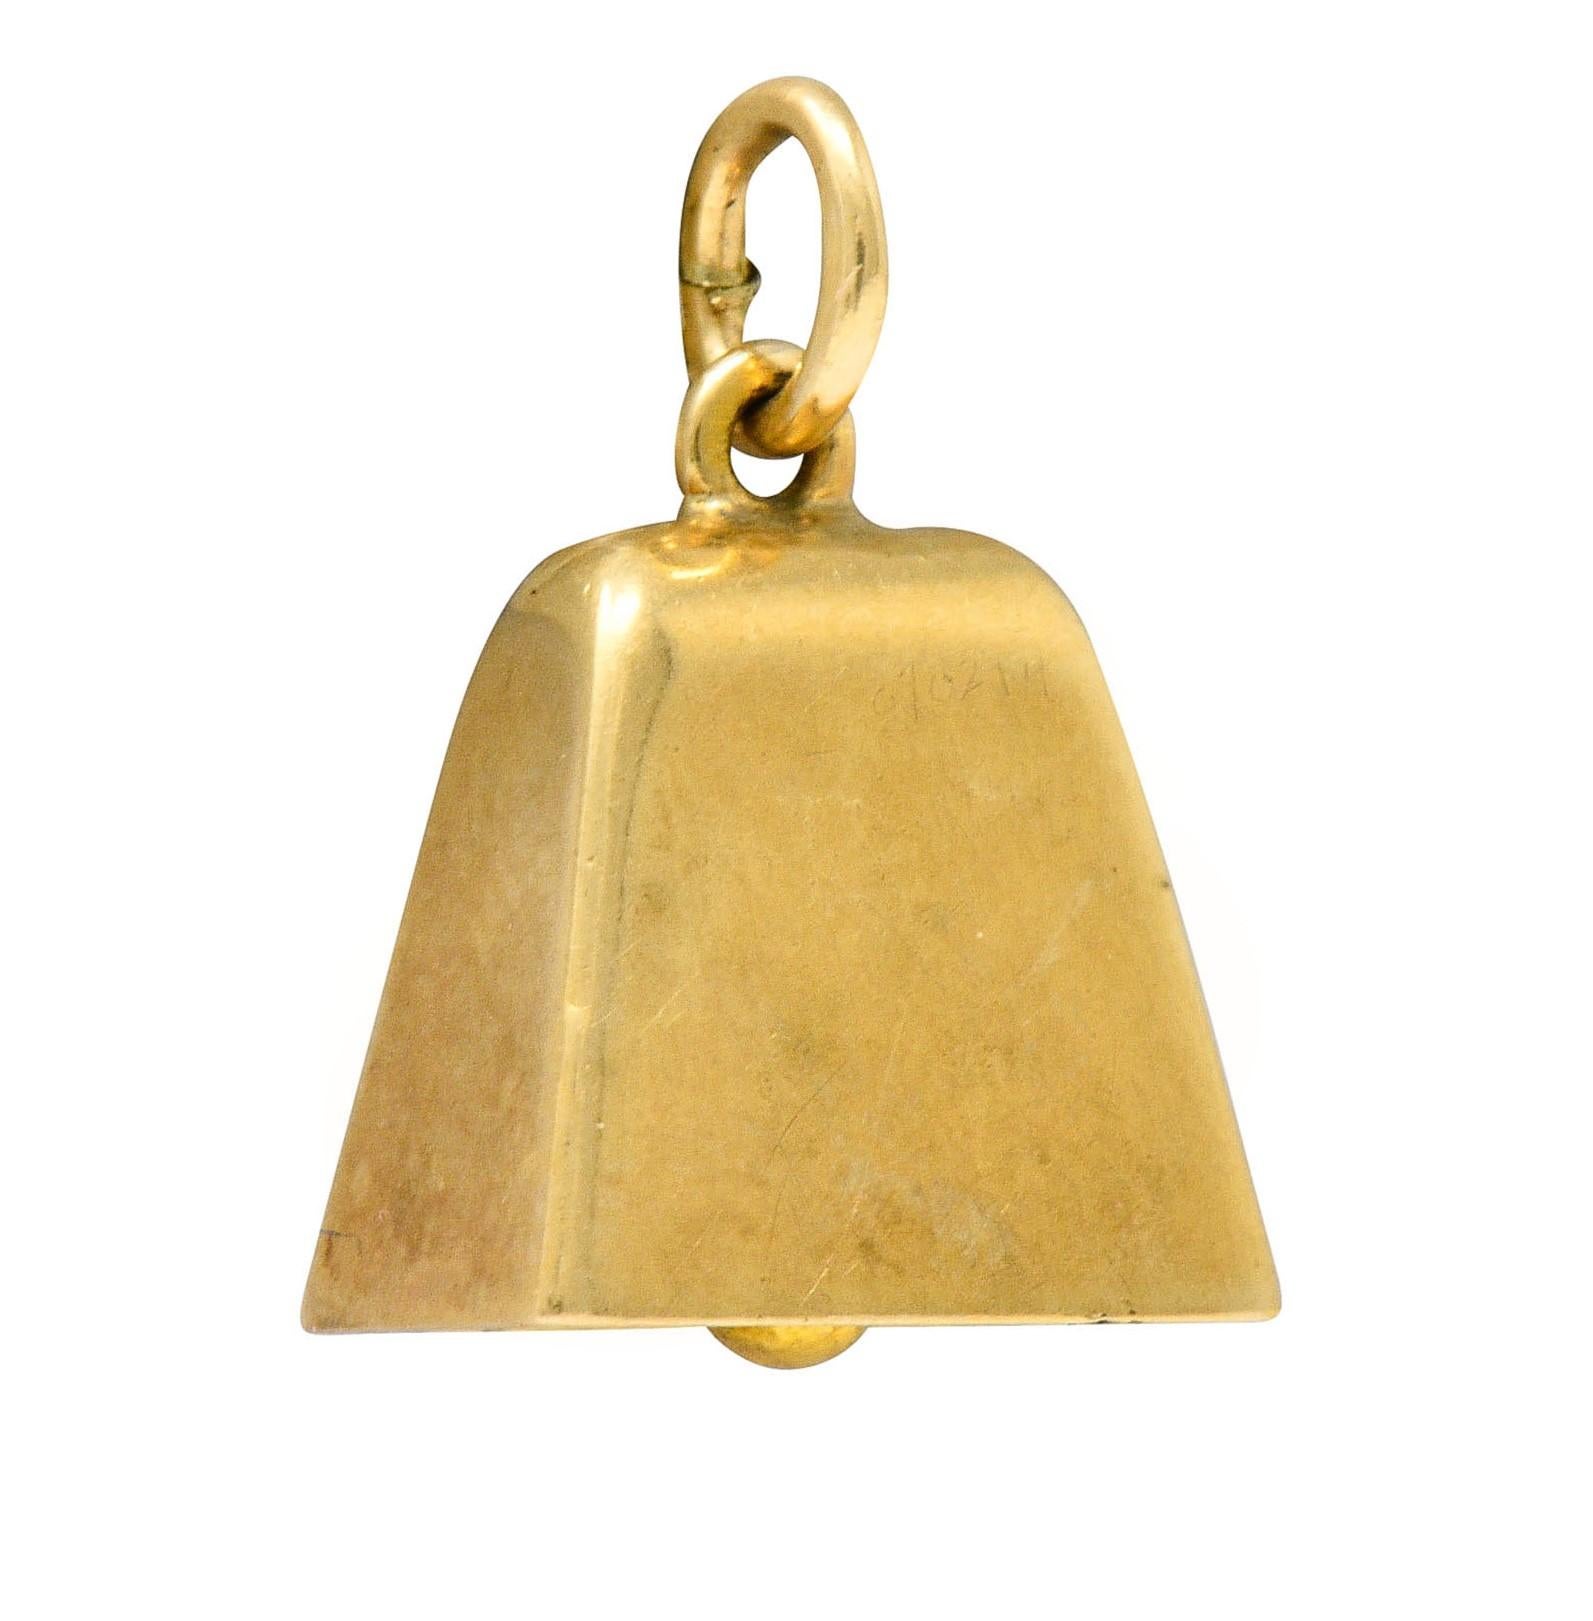 Designed as a delightfully planished bell form

With an articulated clapper inside that chimes

Completed by a jump ring bale

Bale stamped 14K for 14 karat gold and maker's mark for Sloan & Co.

Circa: 1940s

Measures: 1/2 x 5/8 inch (including